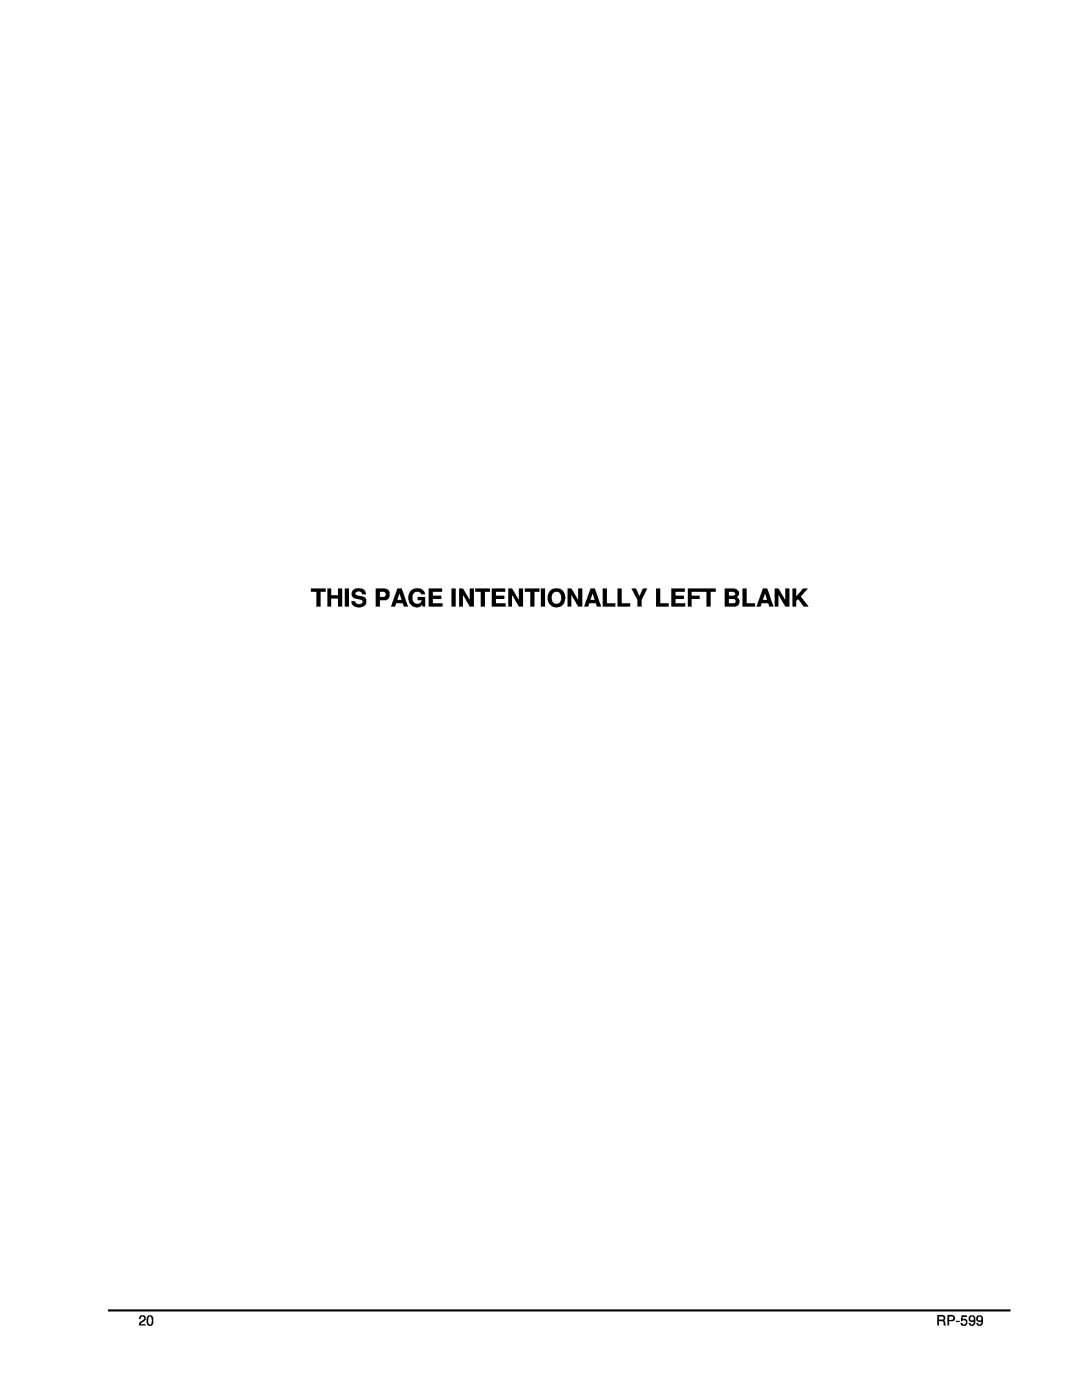 Goodman Mfg CPC180, 15-TON COMMERCIAL PKG AC manual This Page Intentionally Left Blank, RP-599 